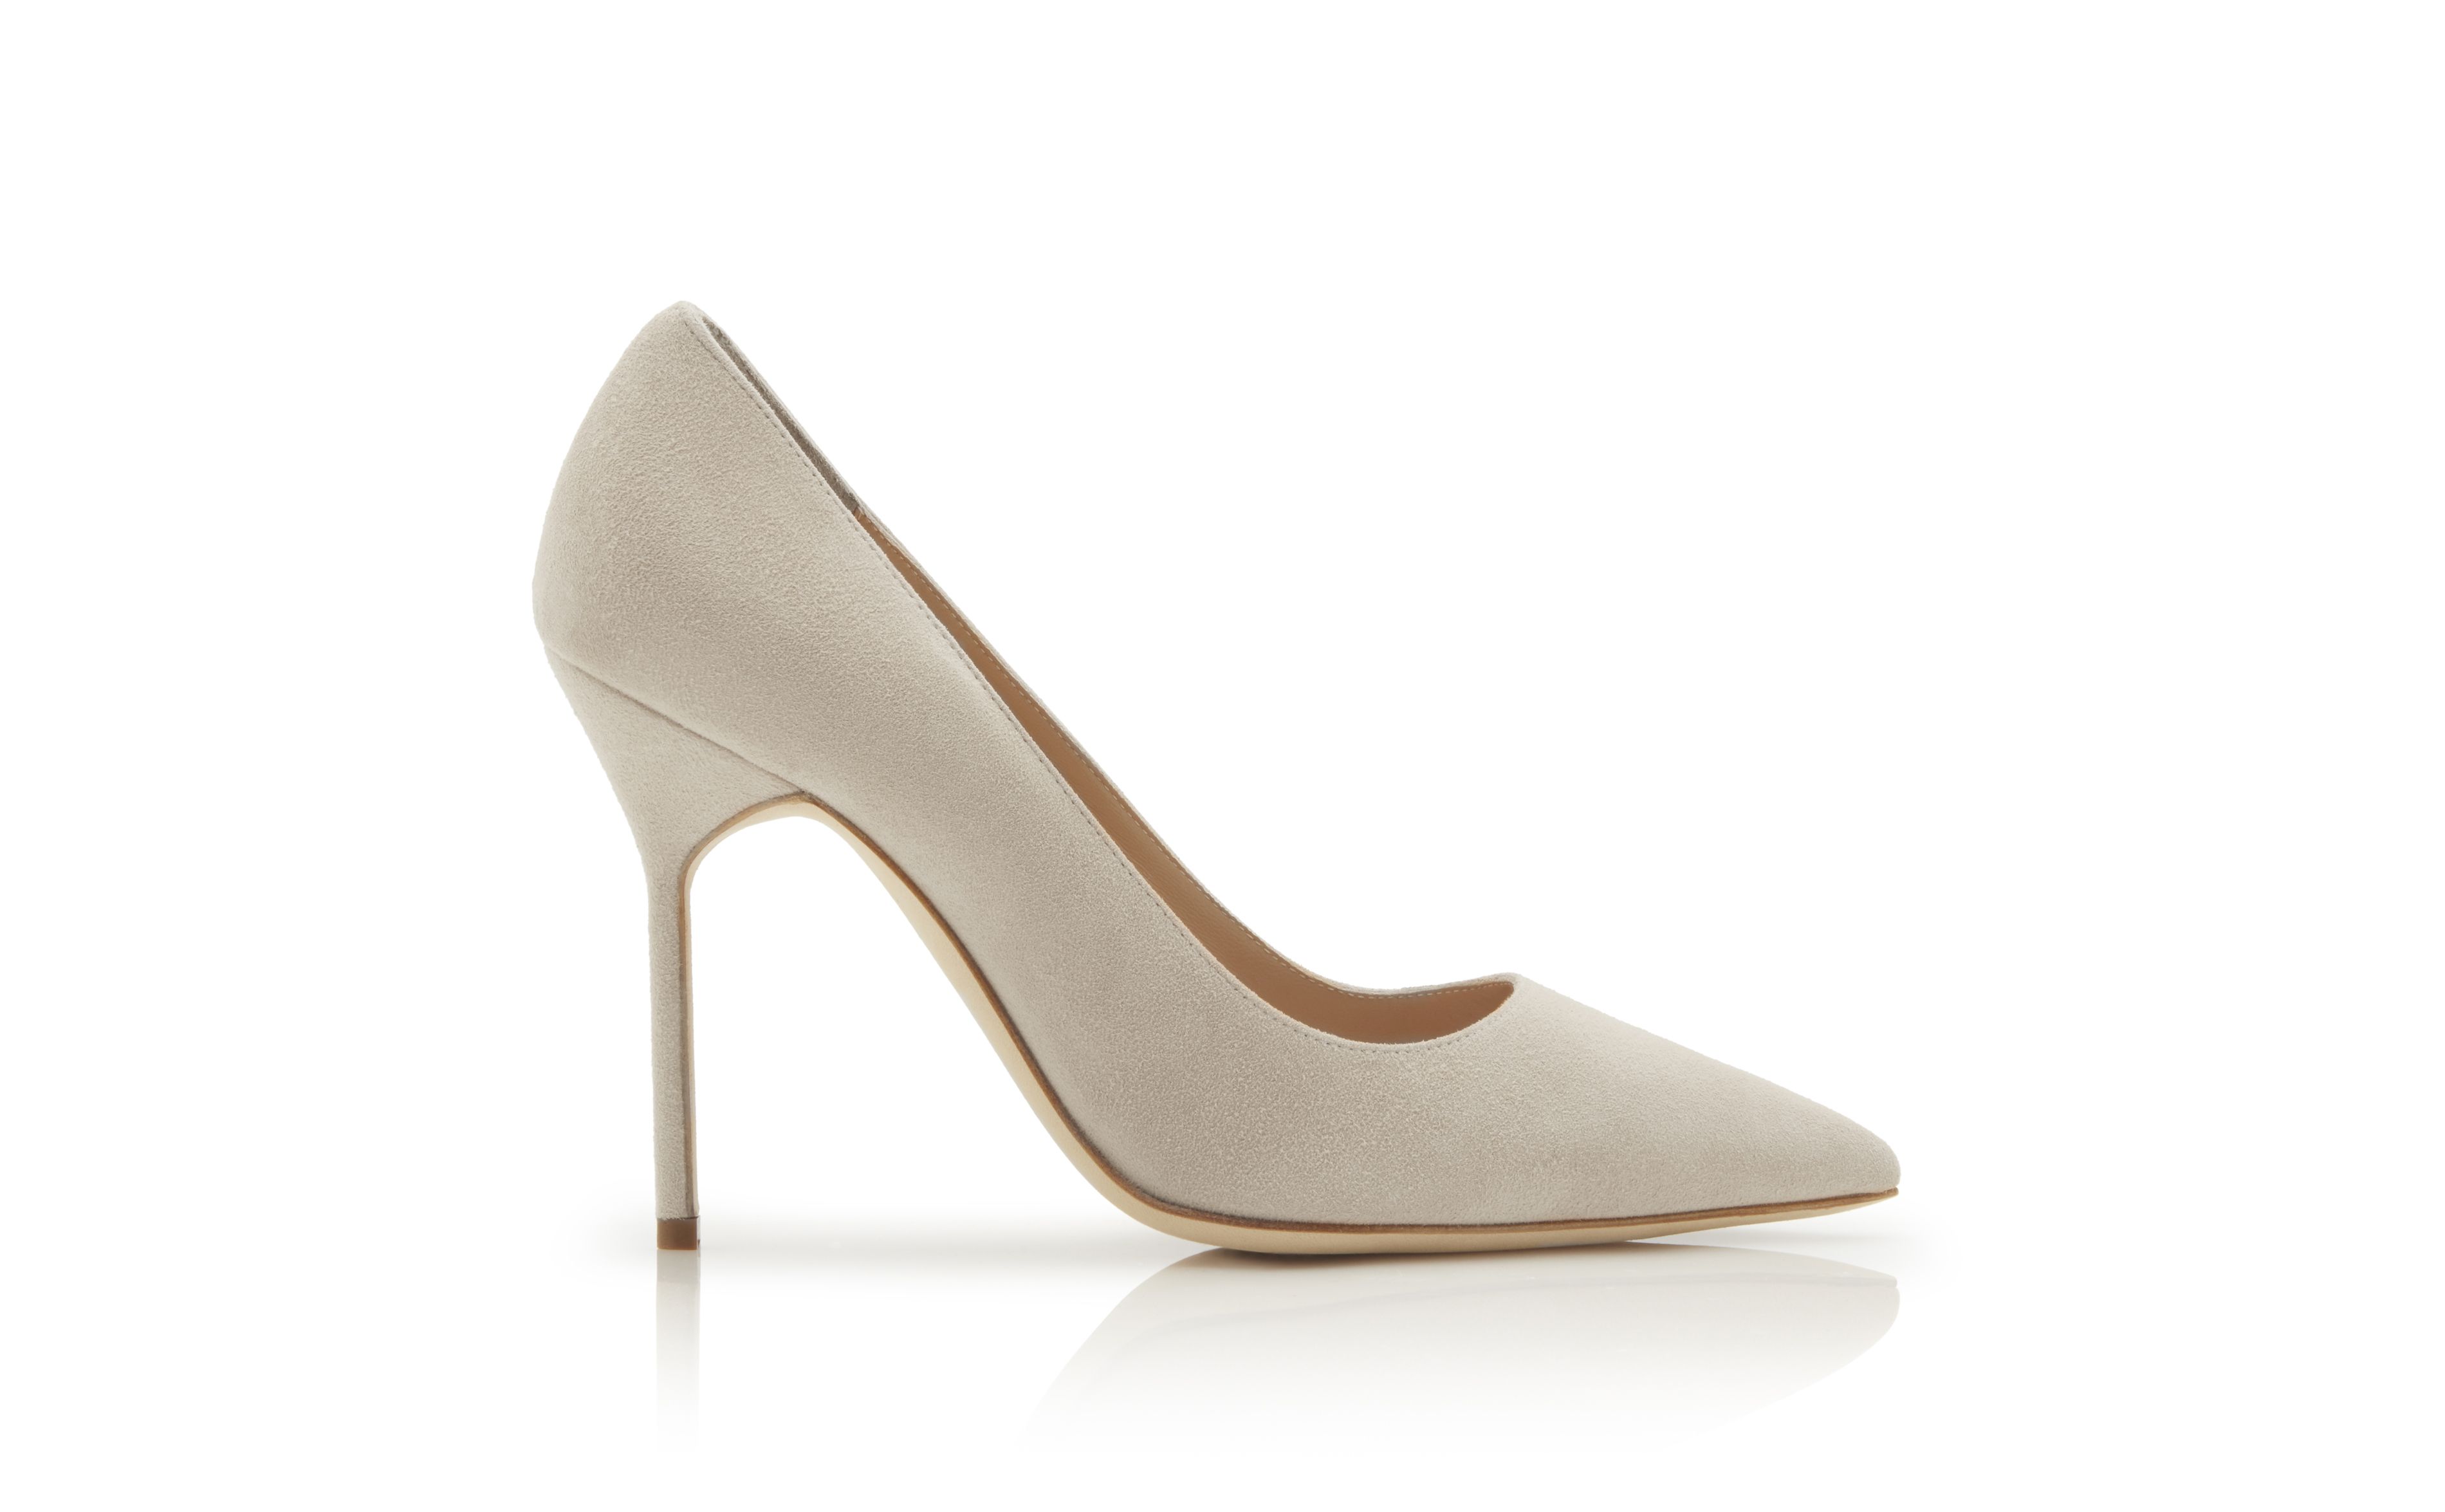 Designer Stone Suede Pointed Toe Pumps - Image Side View